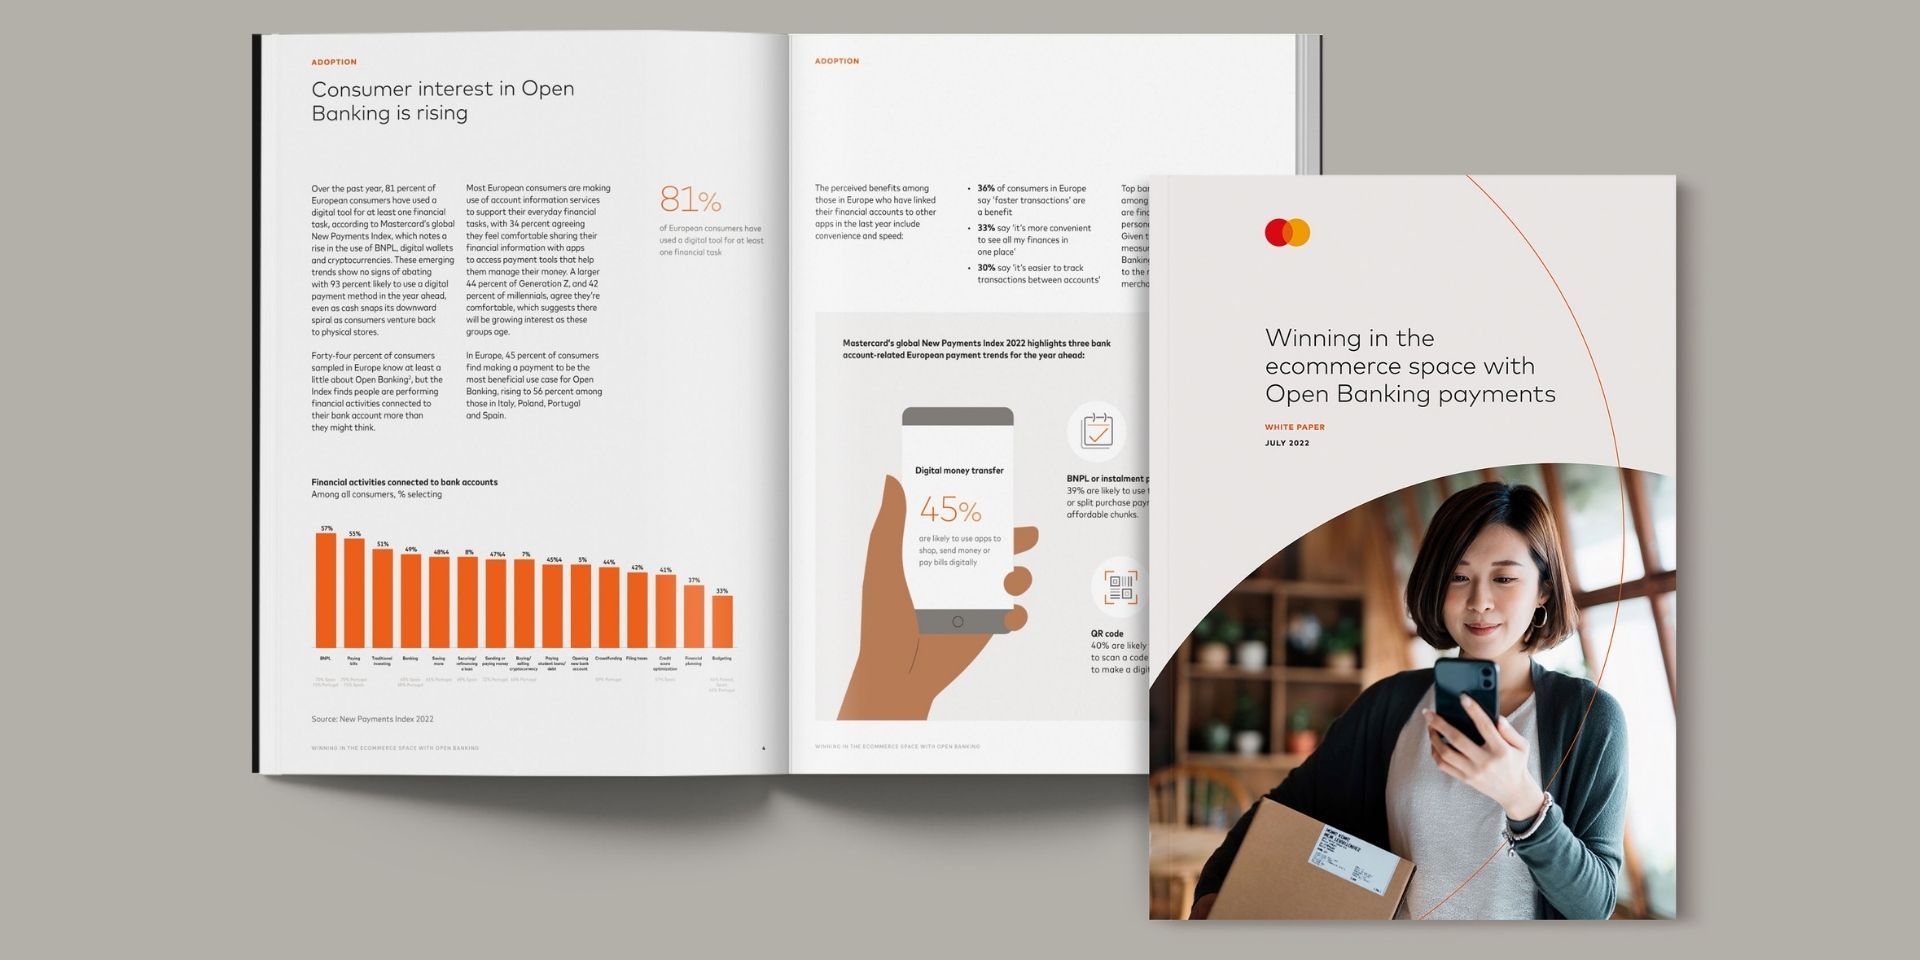 New report: Winning the ecommerce space with open banking payments